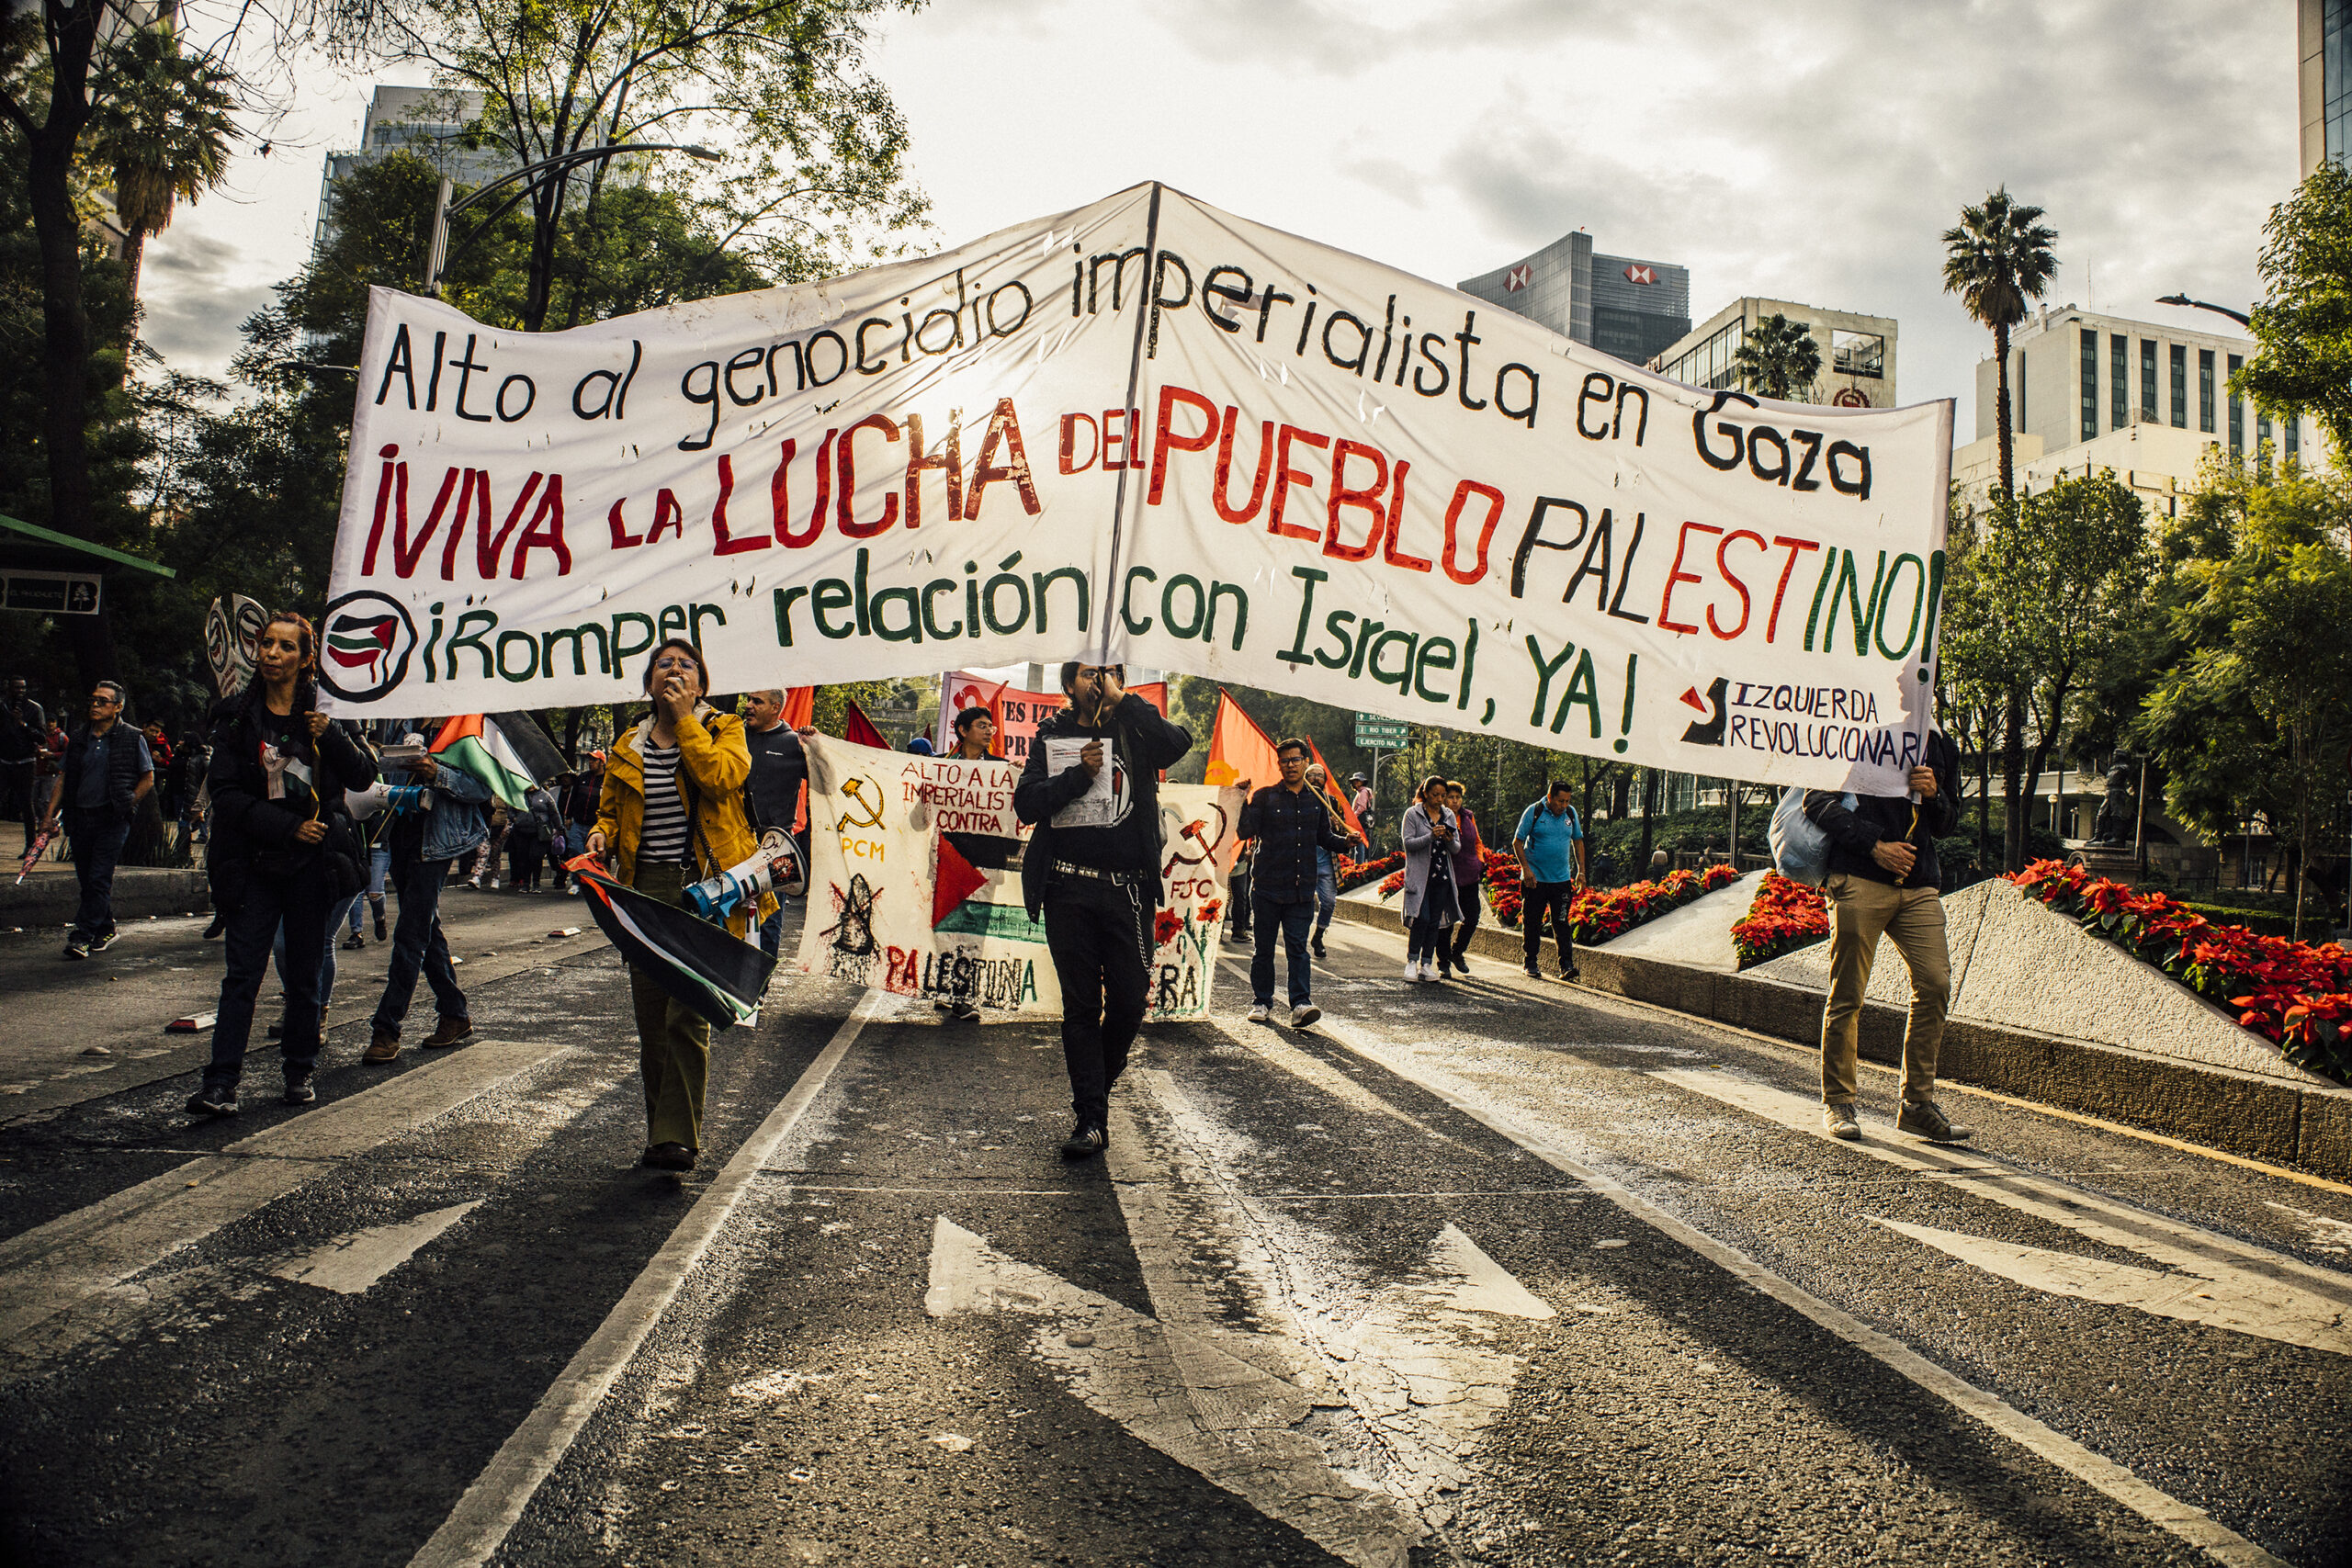 Massive march brings over 20,000 into Mexico City streets for Palestine